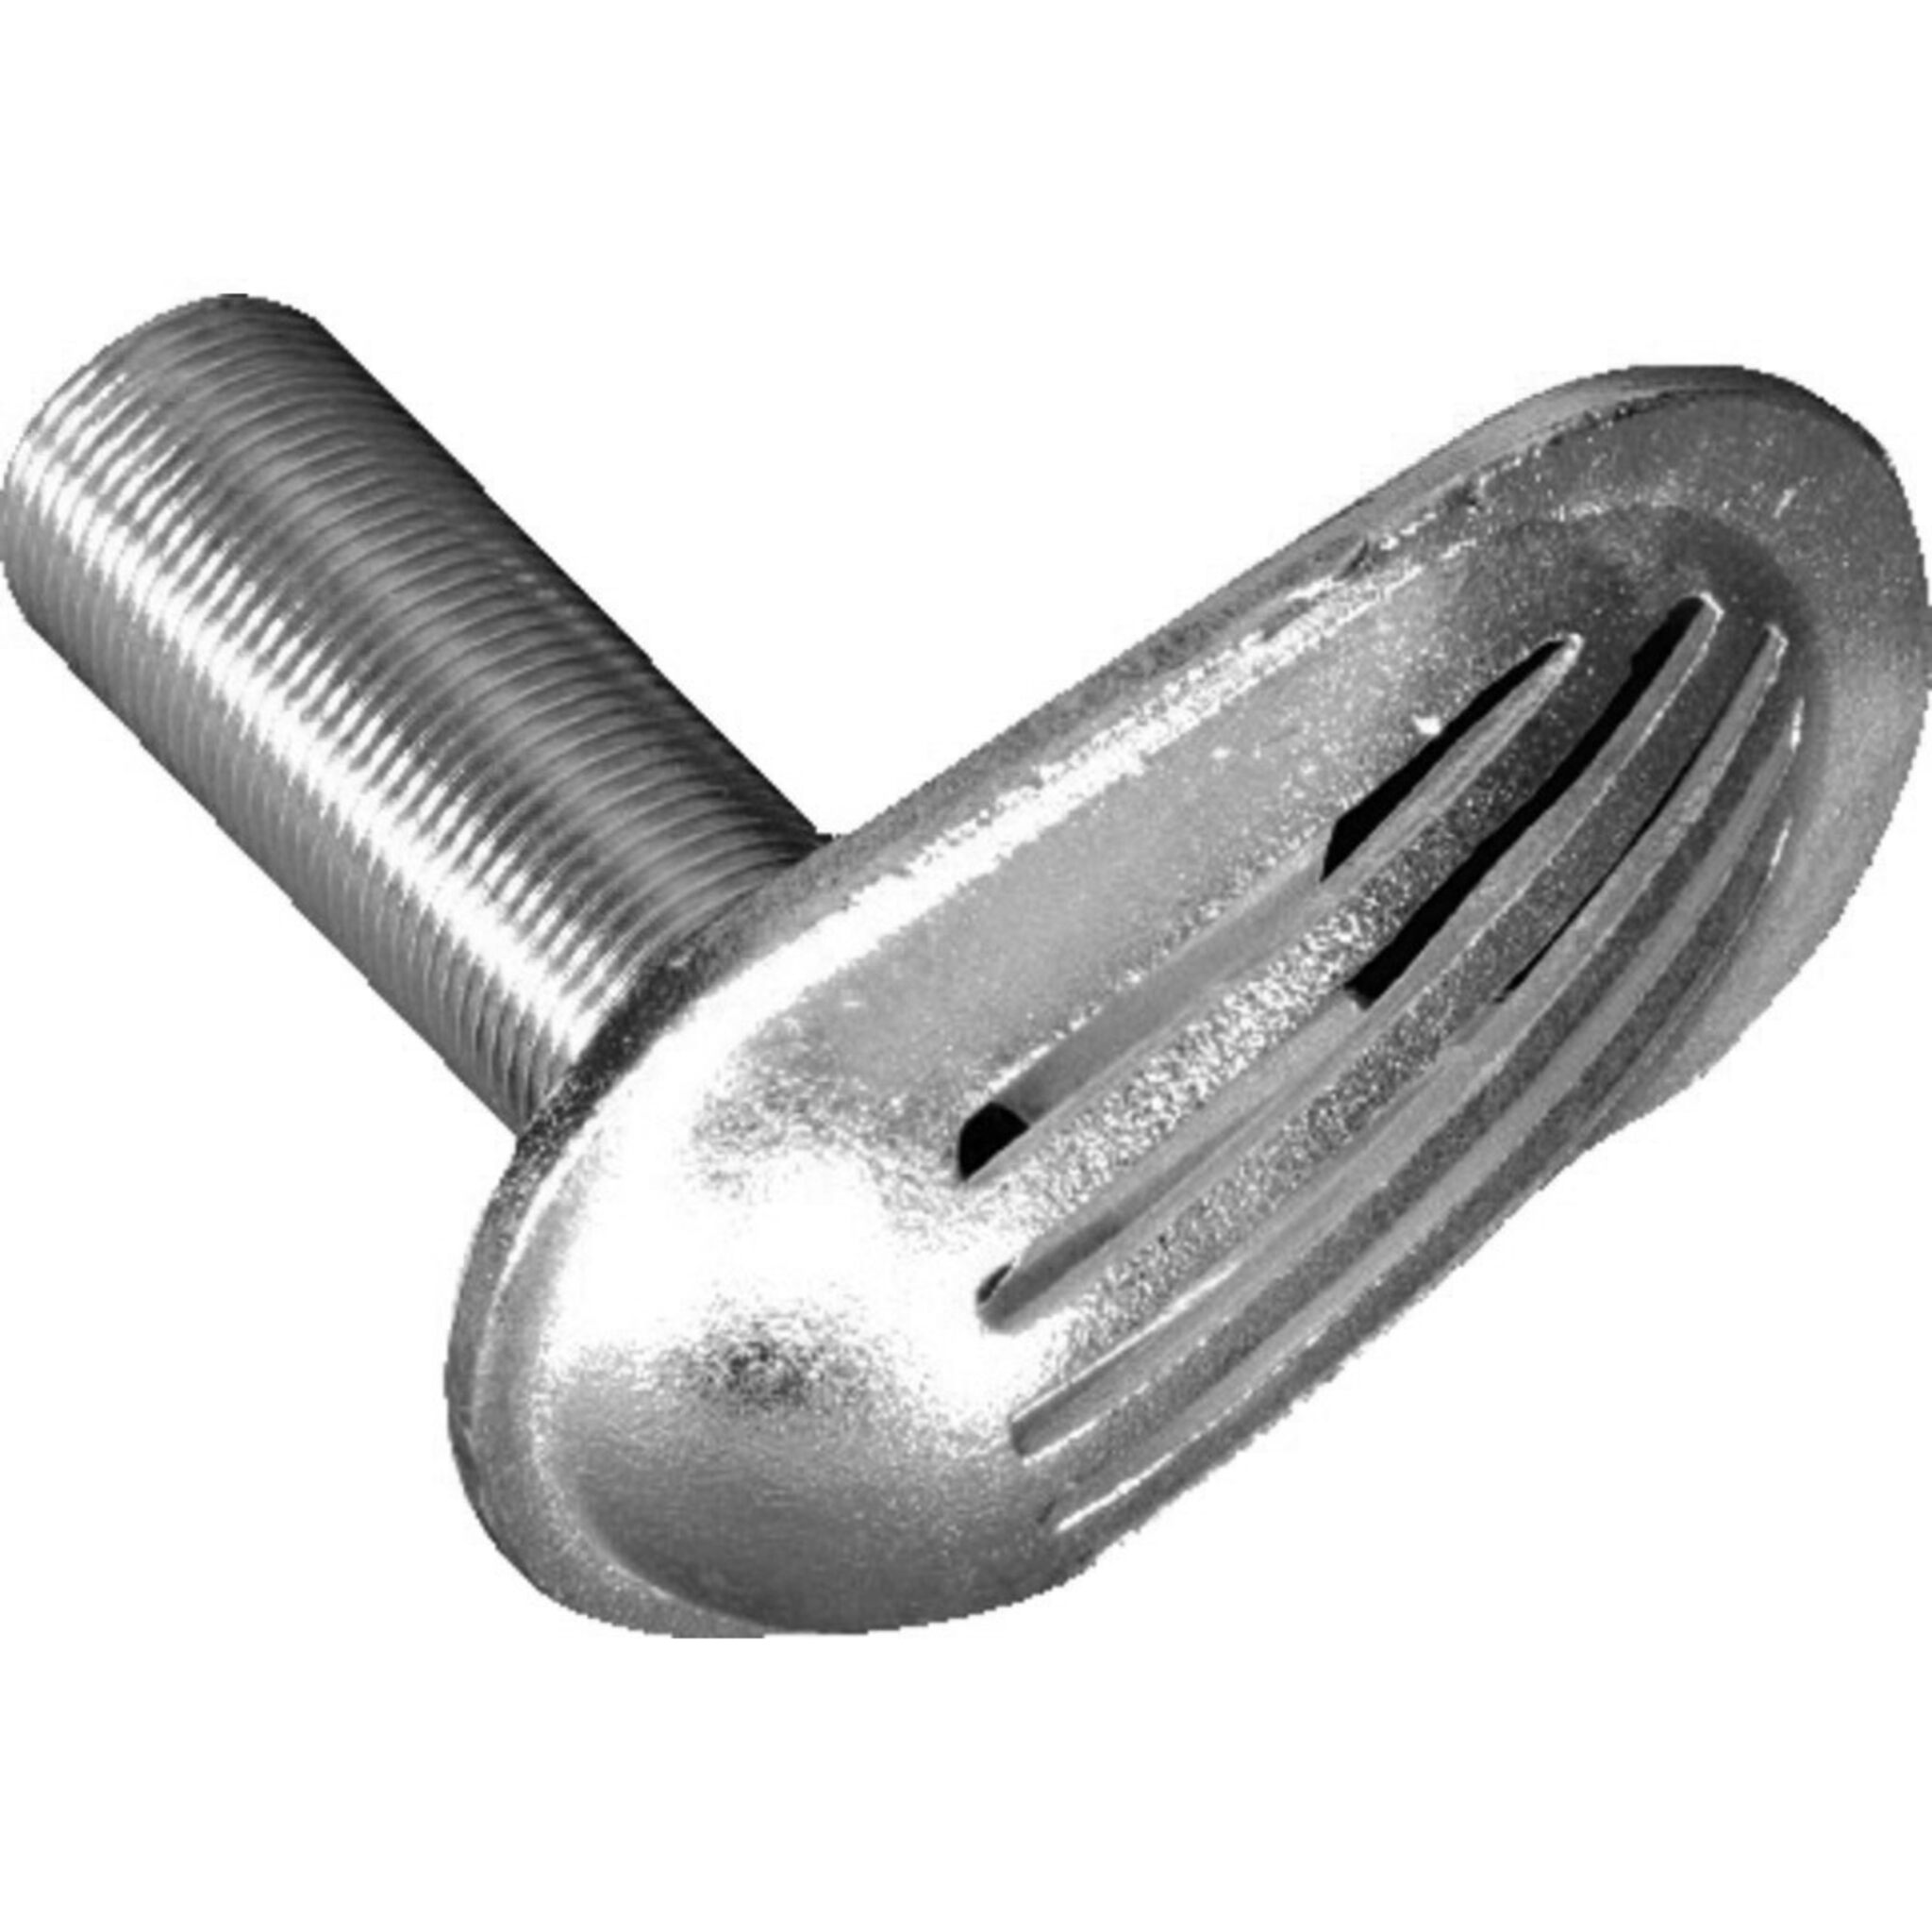 Stainless steel water inlet with strainer